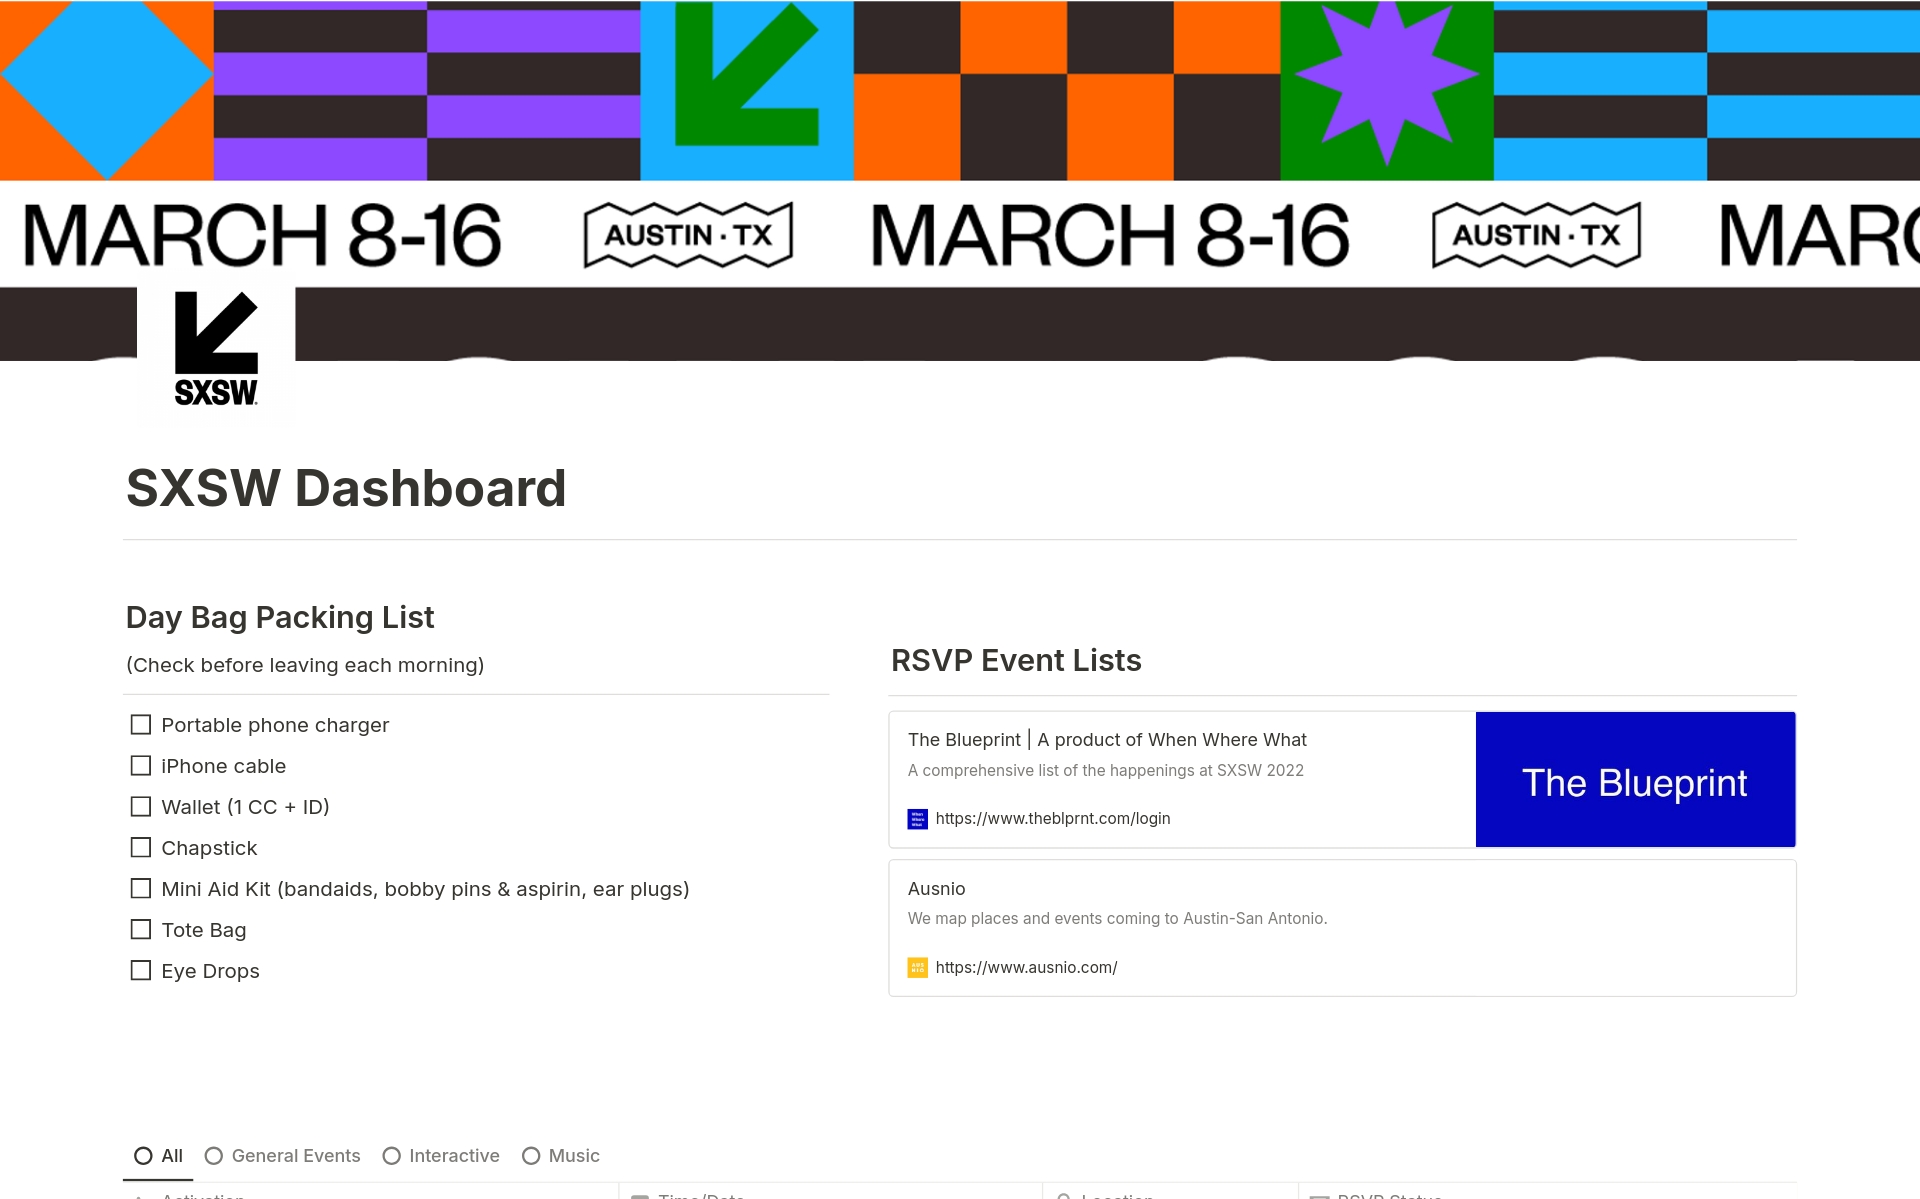 This Notion Dashboard helps you track all of your event RSVP information during the SXSW Conference.